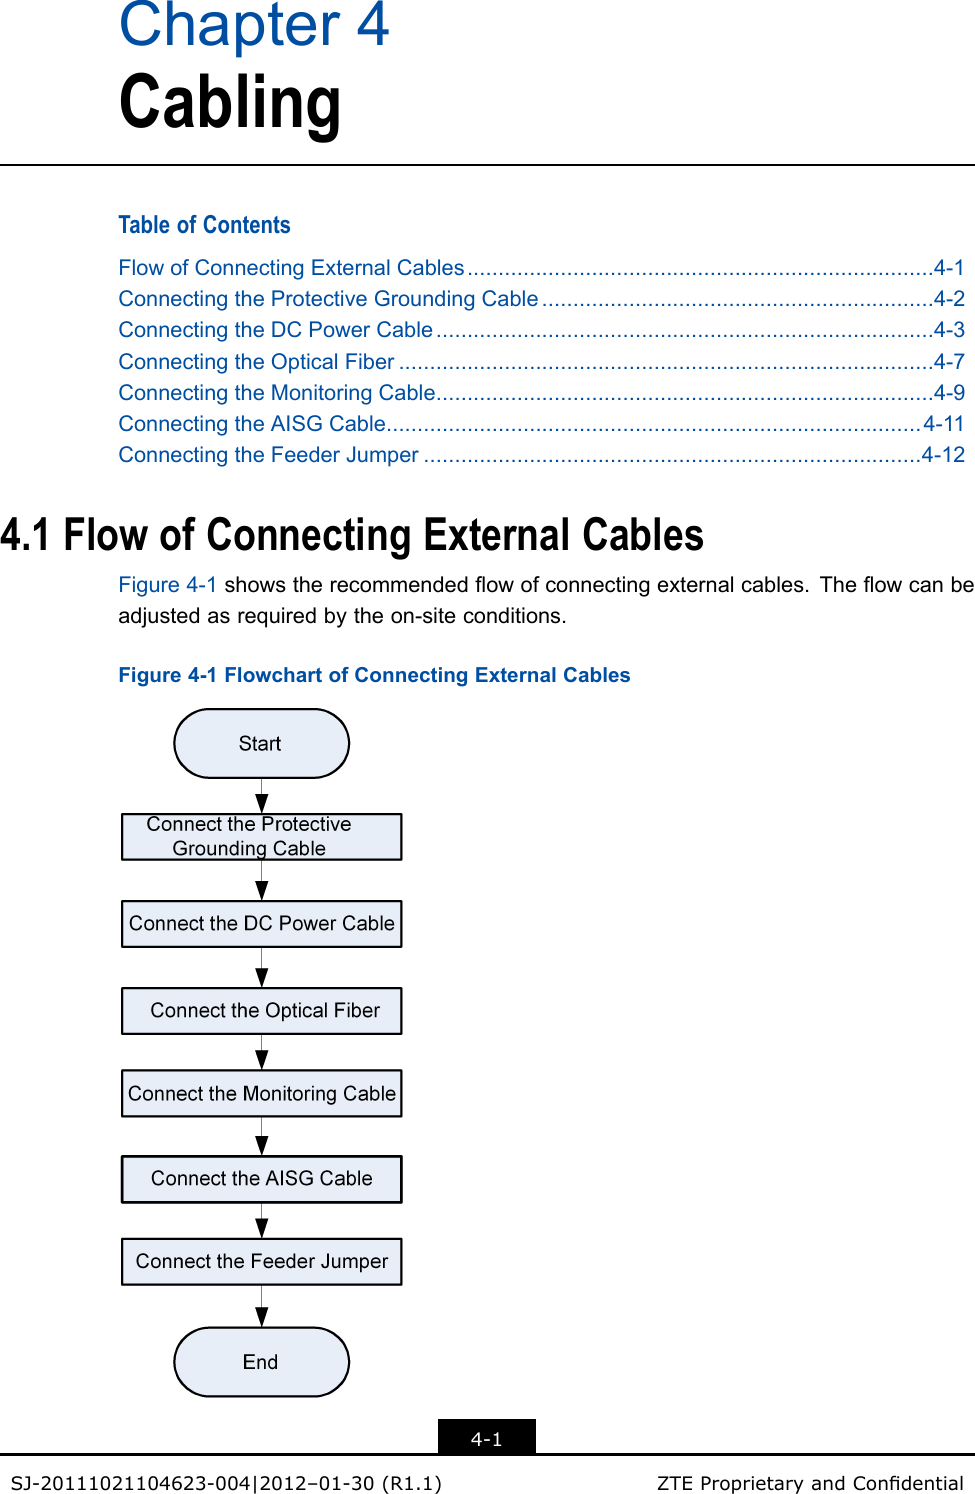 Chapter4CablingTableofContentsFlowofConnectingExternalCables...........................................................................4-1ConnectingtheProtectiveGroundingCable...............................................................4-2ConnectingtheDCPowerCable................................................................................4-3ConnectingtheOpticalFiber......................................................................................4-7ConnectingtheMonitoringCable................................................................................4-9ConnectingtheAISGCable......................................................................................4-11ConnectingtheFeederJumper................................................................................4-124.1FlowofConnectingExternalCablesFigure4-1showstherecommendedowofconnectingexternalcables.Theowcanbeadjustedasrequiredbytheon-siteconditions.Figure4-1FlowchartofConnectingExternalCables4-1SJ-20111021104623-004|2012–01-30(R1.1)ZTEProprietaryandCondential